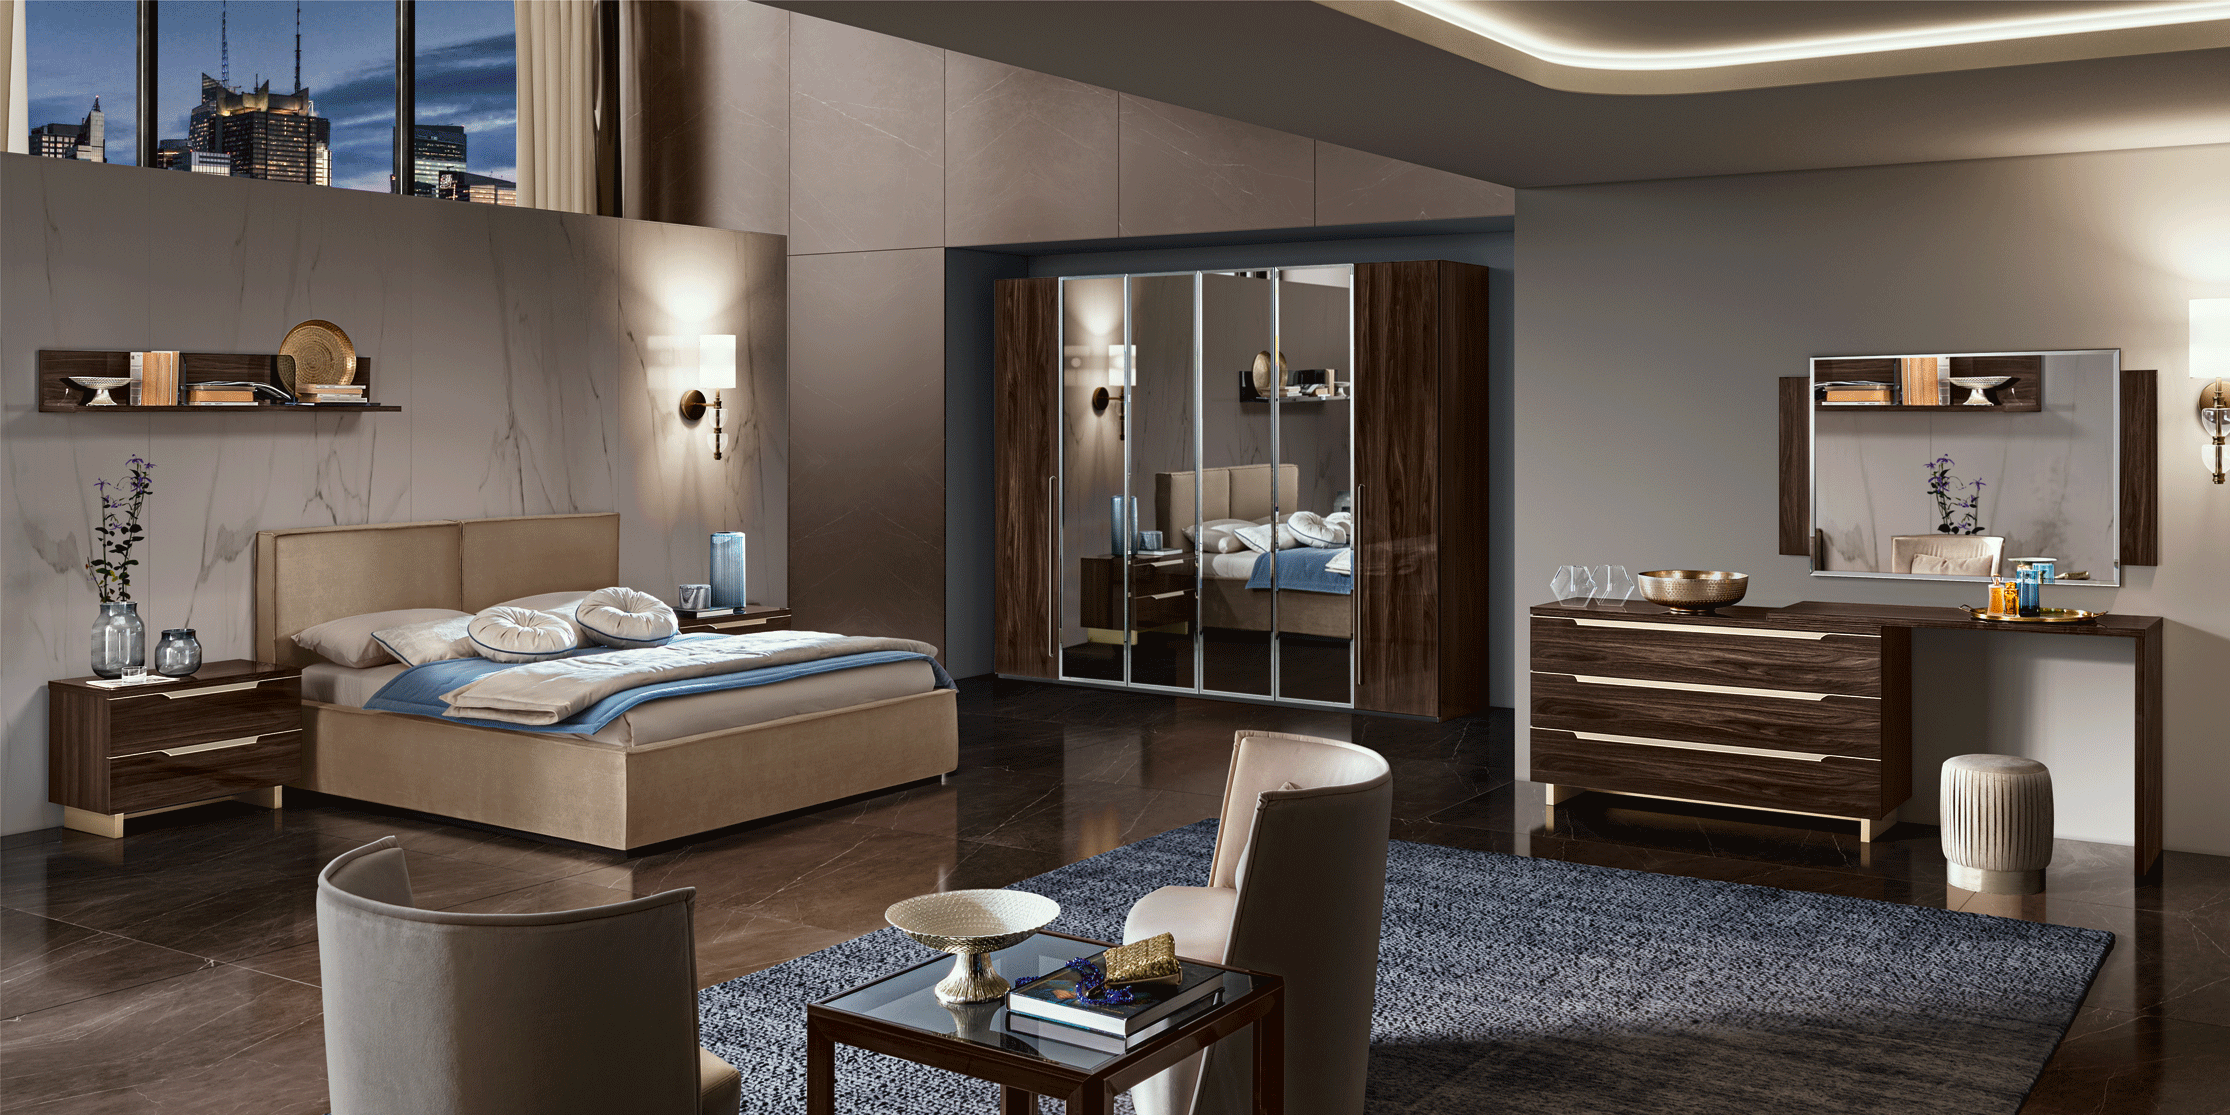 Bedroom Furniture Mirrors Smart Bedgroup Walnut Additional items